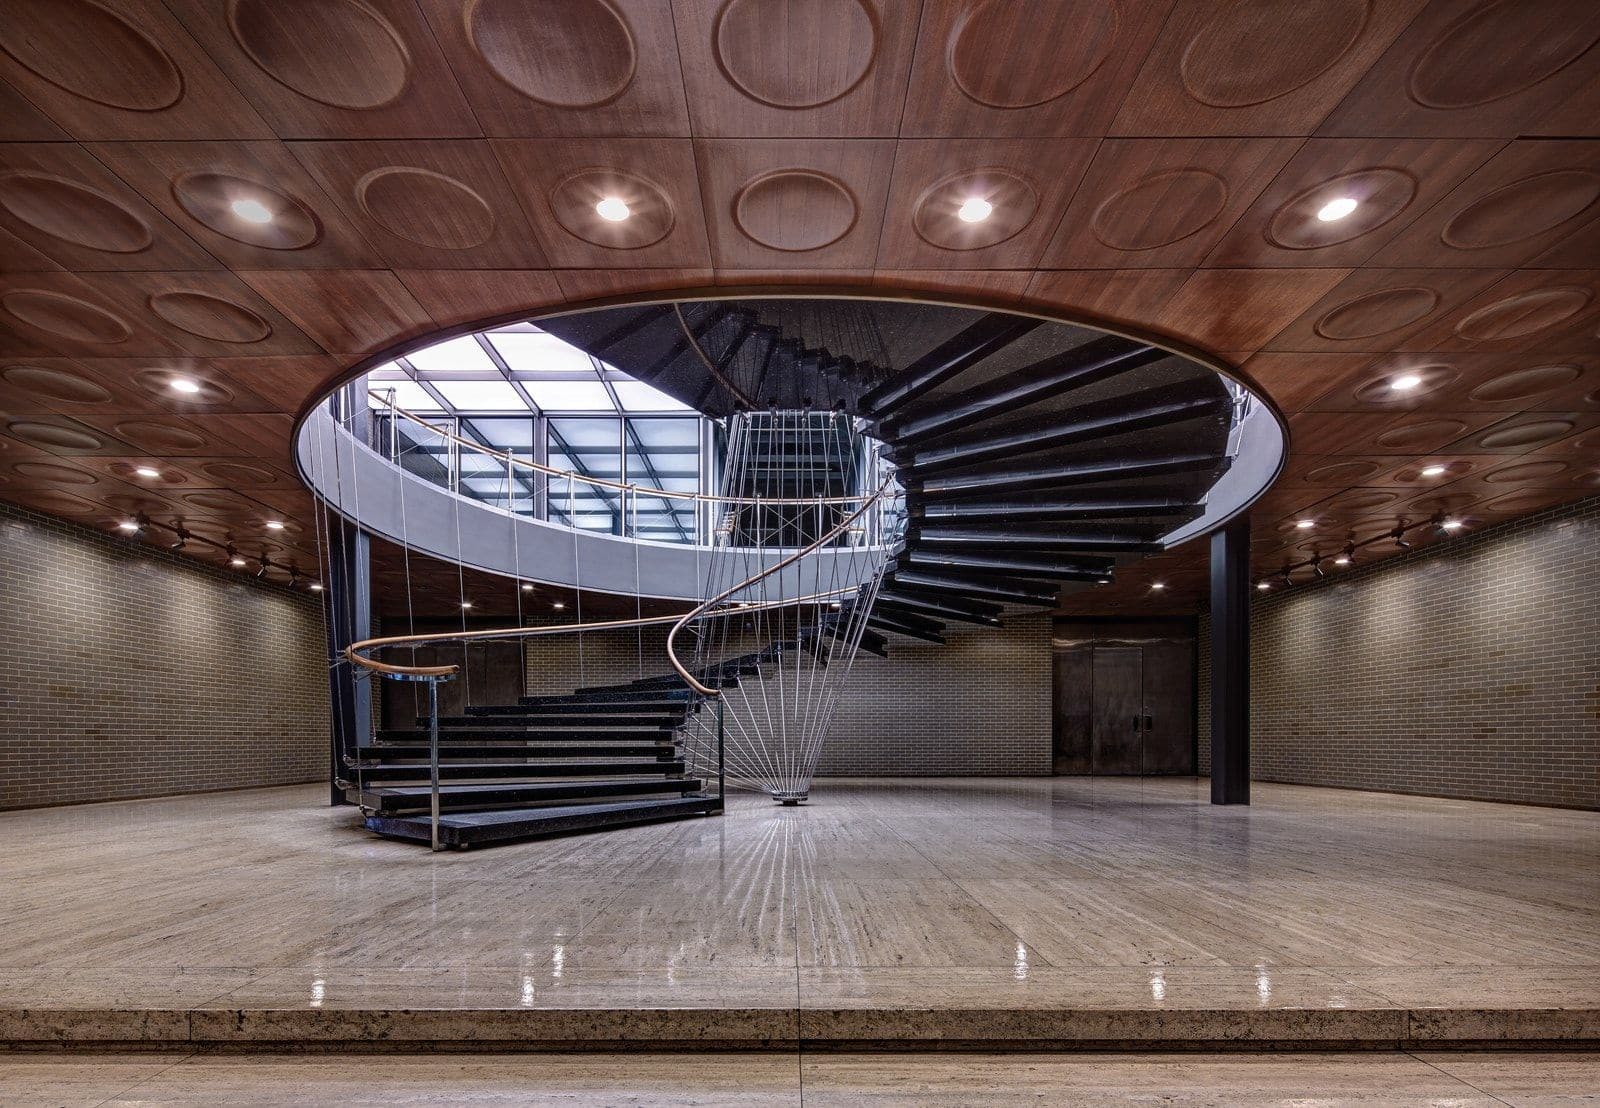 A grand spiral staircase inside the Eero Saarinen-deisgned General Motors Technical Center